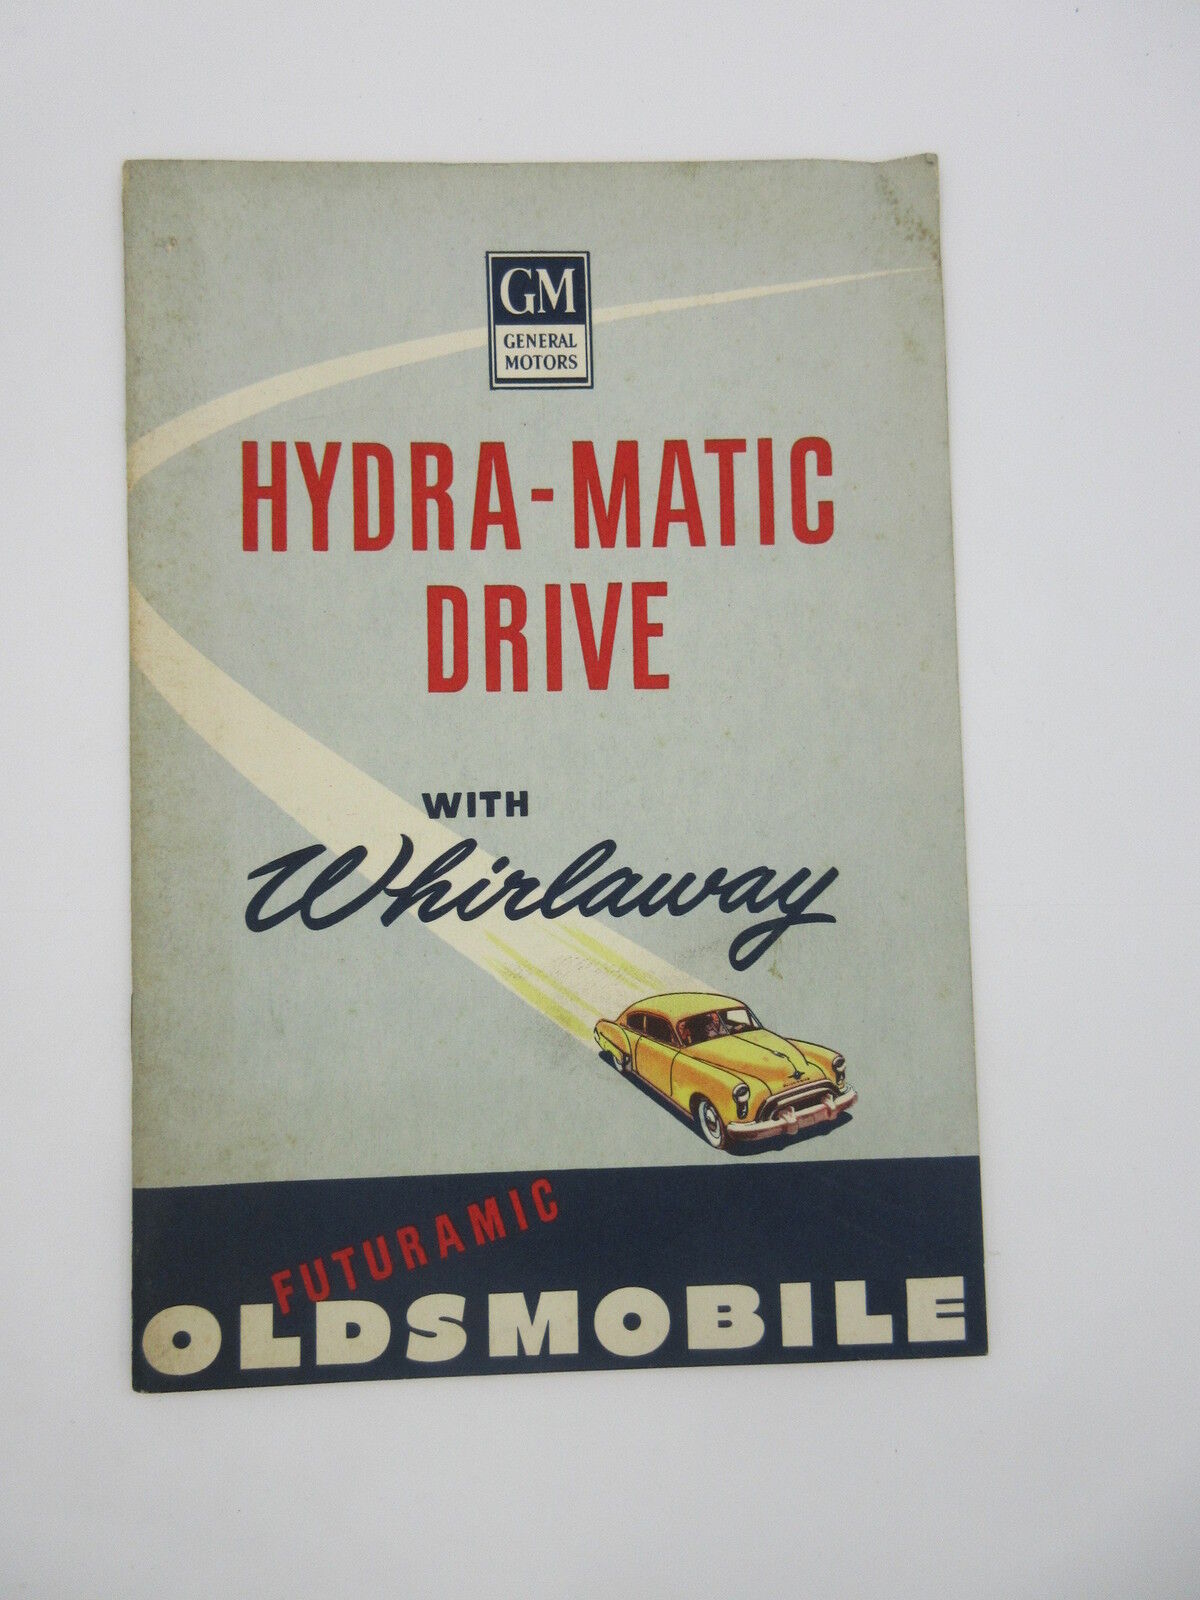 1949 Oldsmobile Hydra-Matic Drive with Whirlaway Dealership Brochure GM